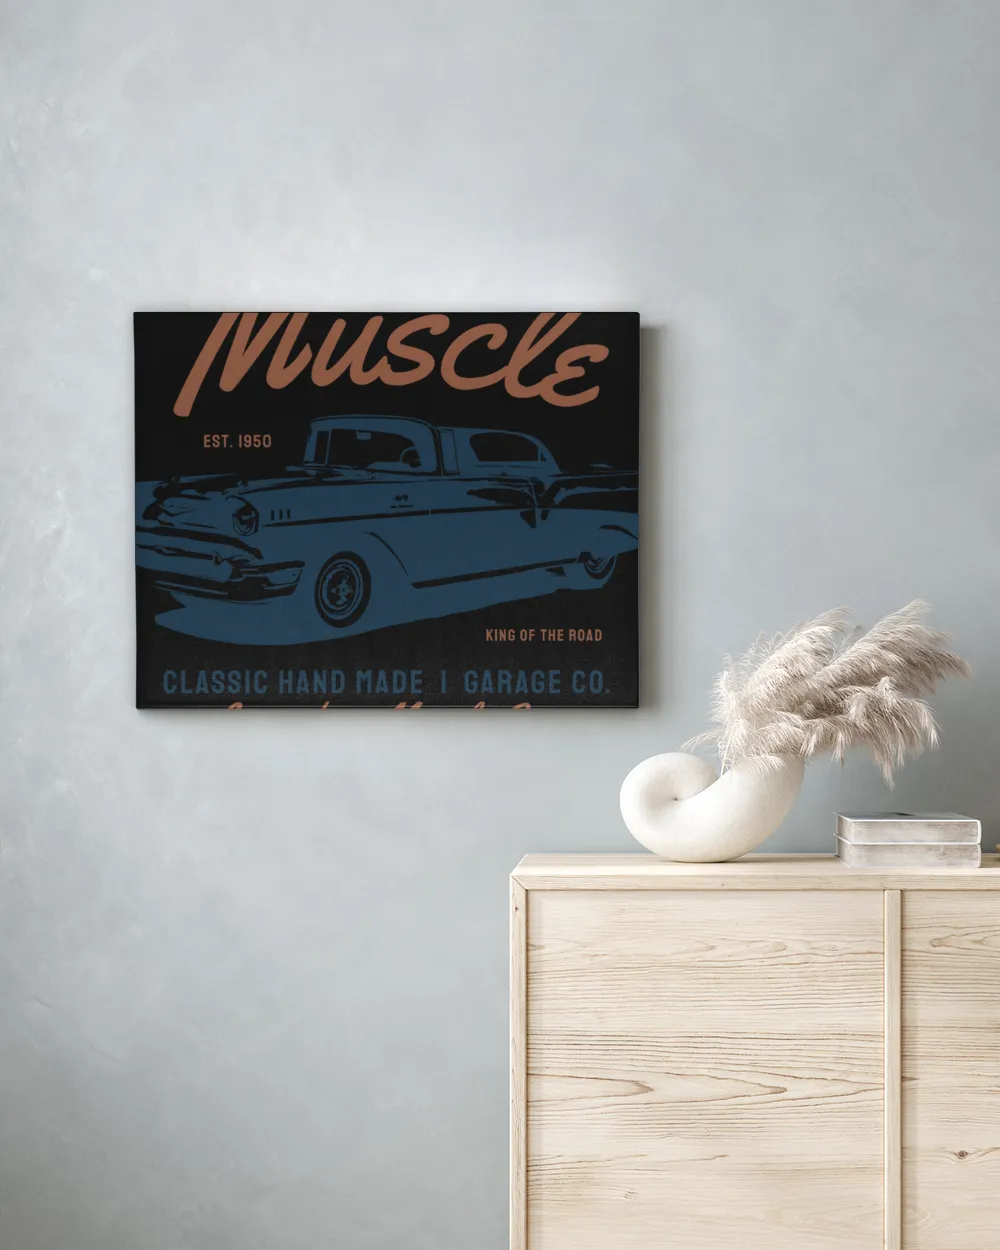 Muscle Est 1950 King Of The Road Classic Hand Made Legendary Muscle Cars Los Angeles California Usa Retro Vintage